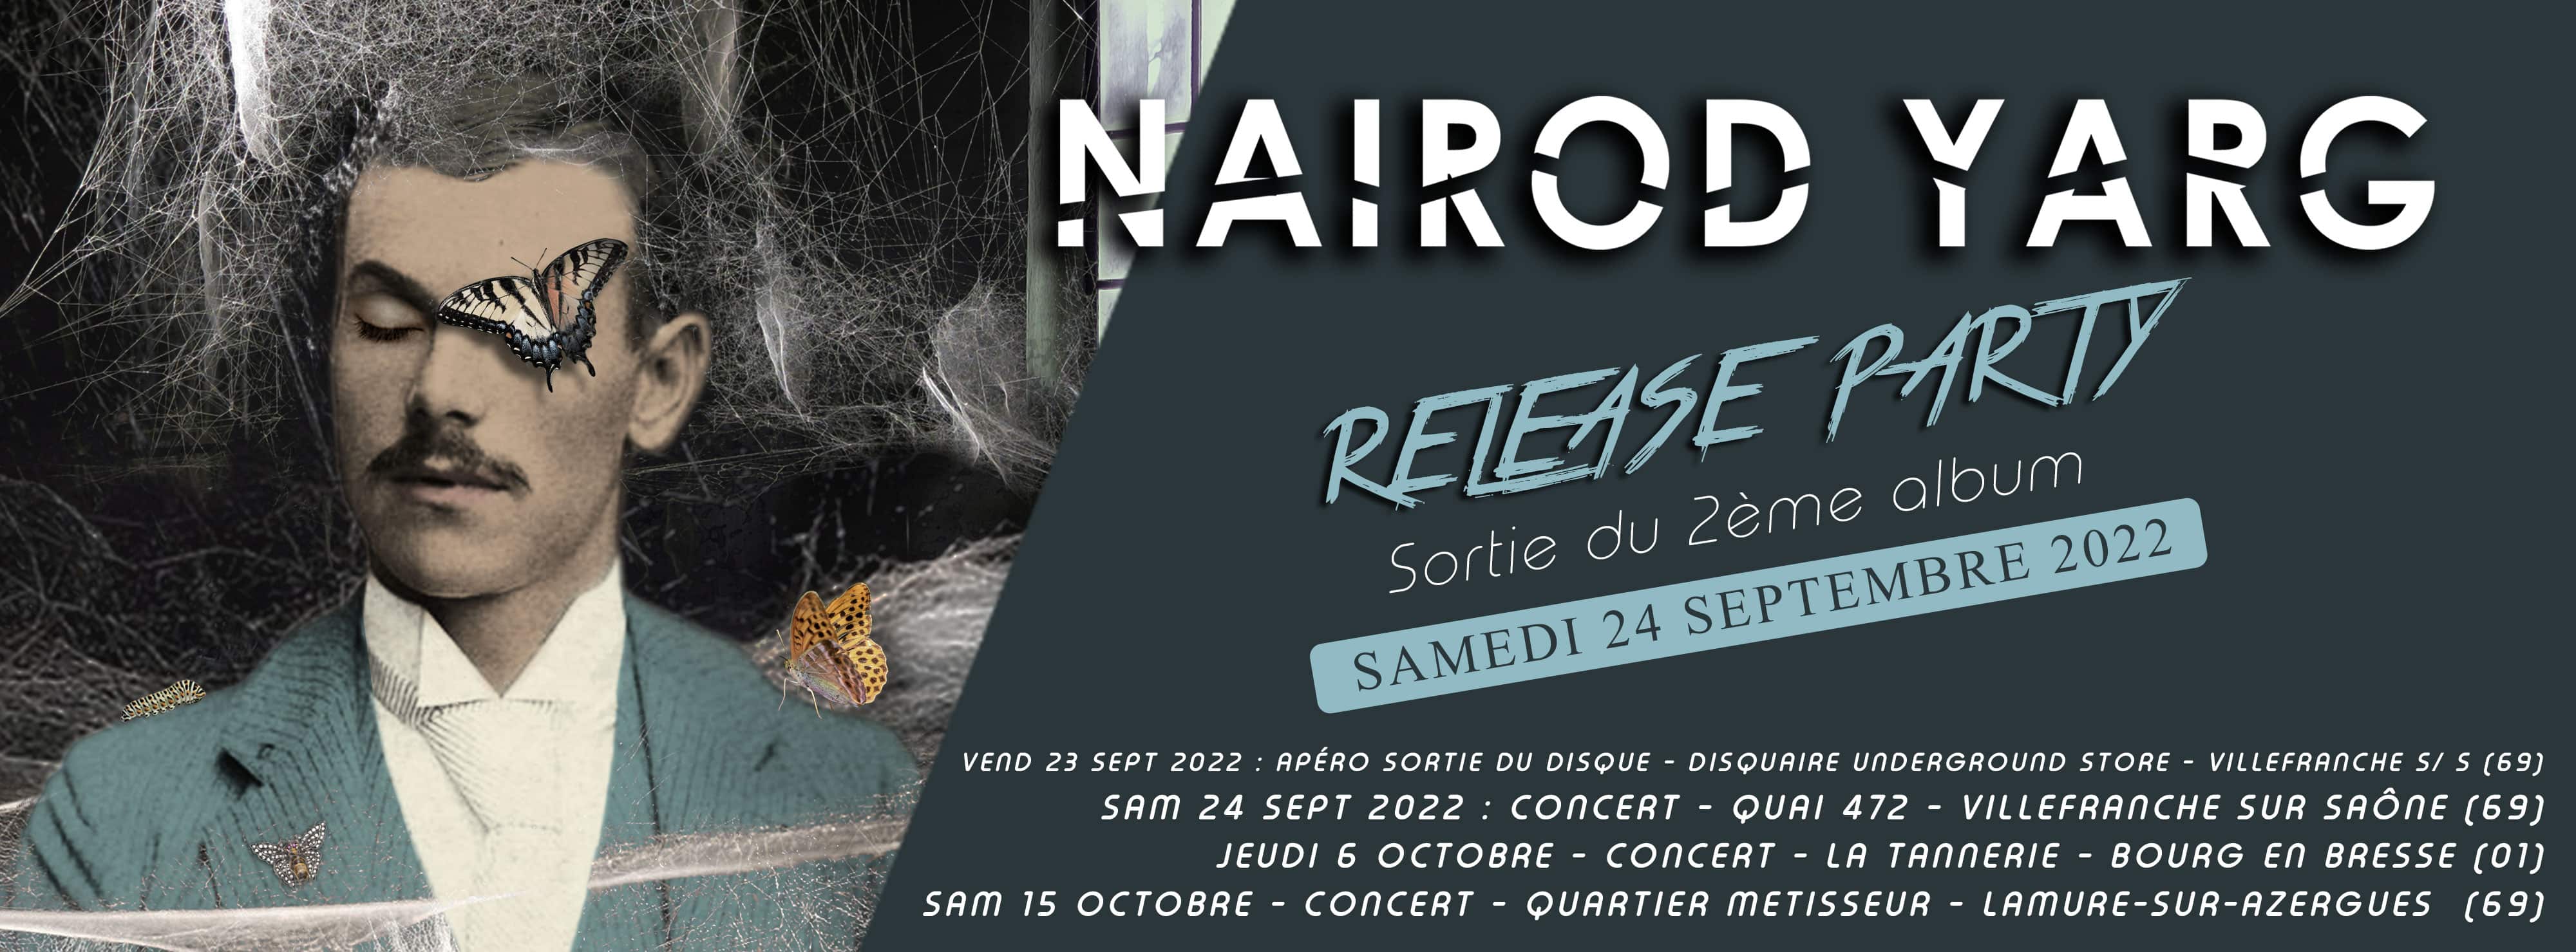 nairod yard release party